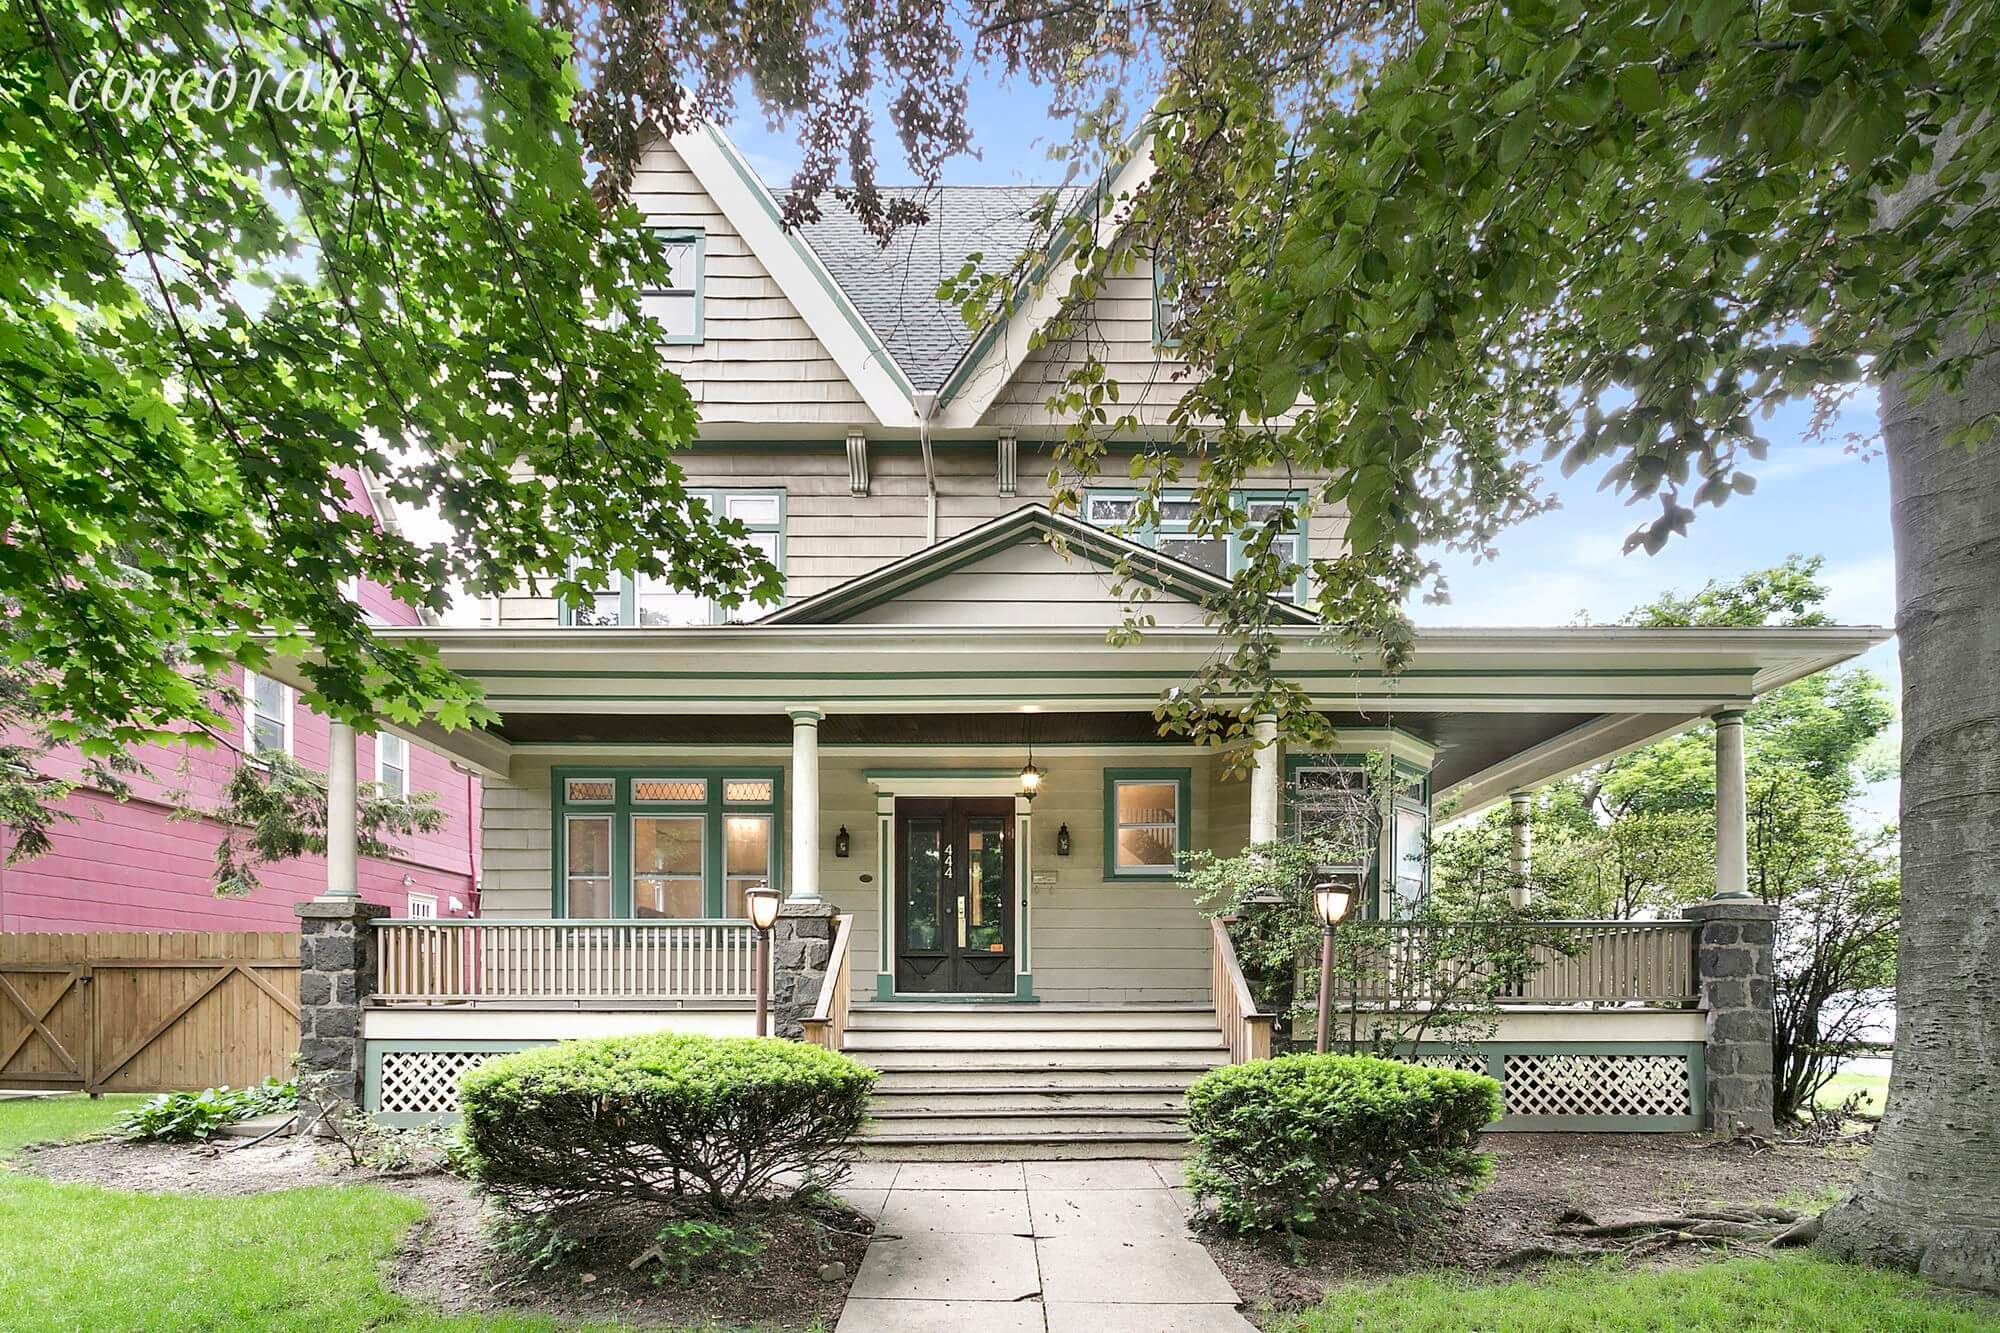 Brooklyn Homes for Sale in Ditmas Park at 444 E. 17th Street